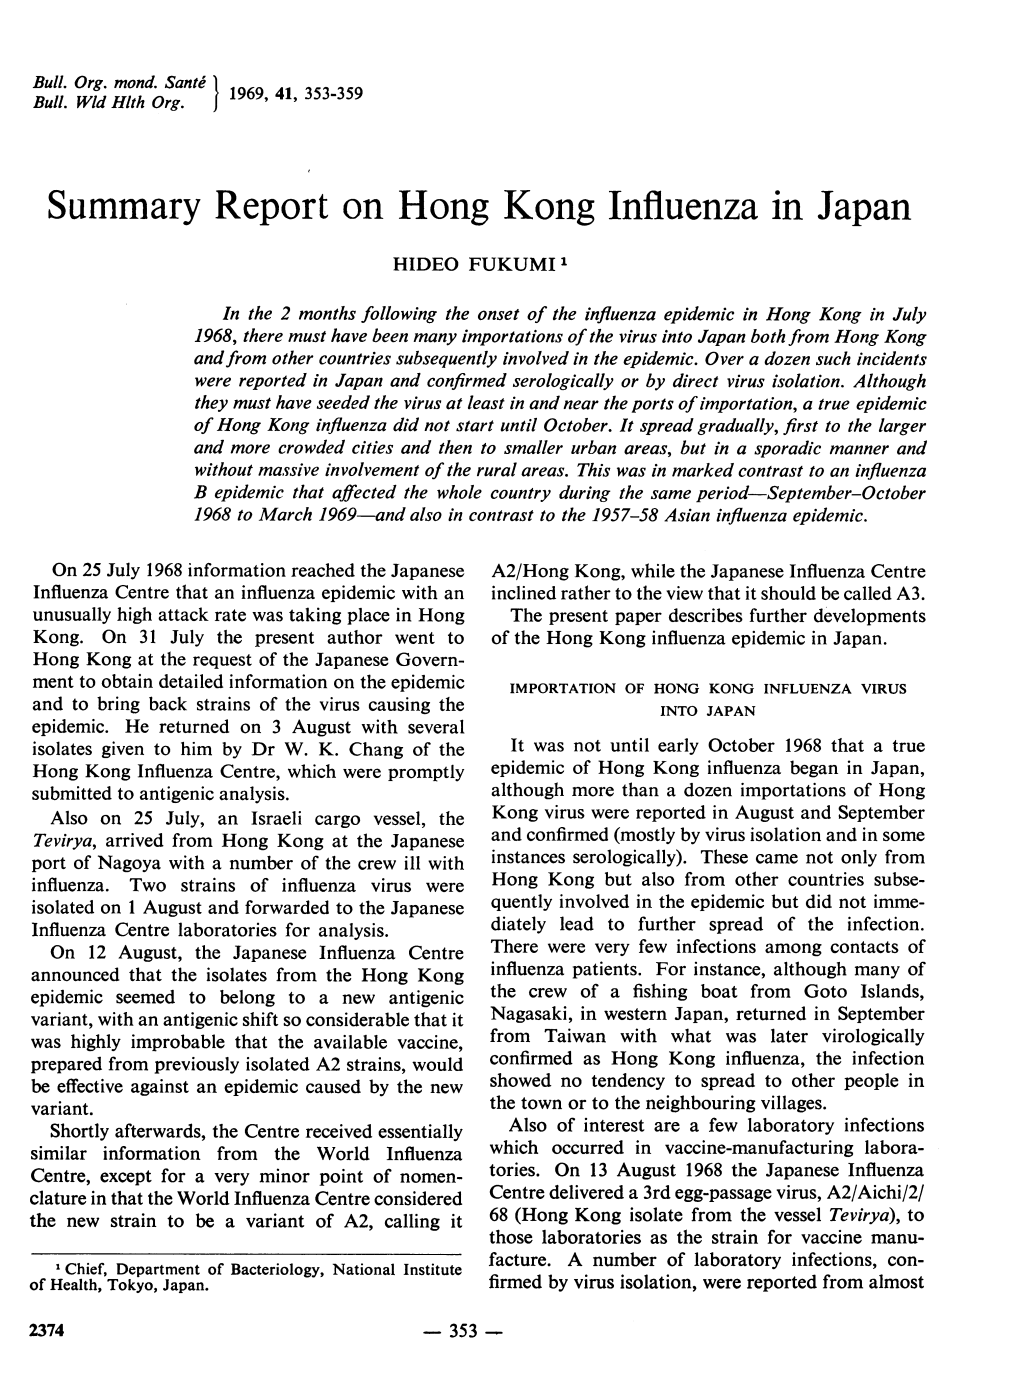 Summary Report on Hong Kong Influenza in Japan